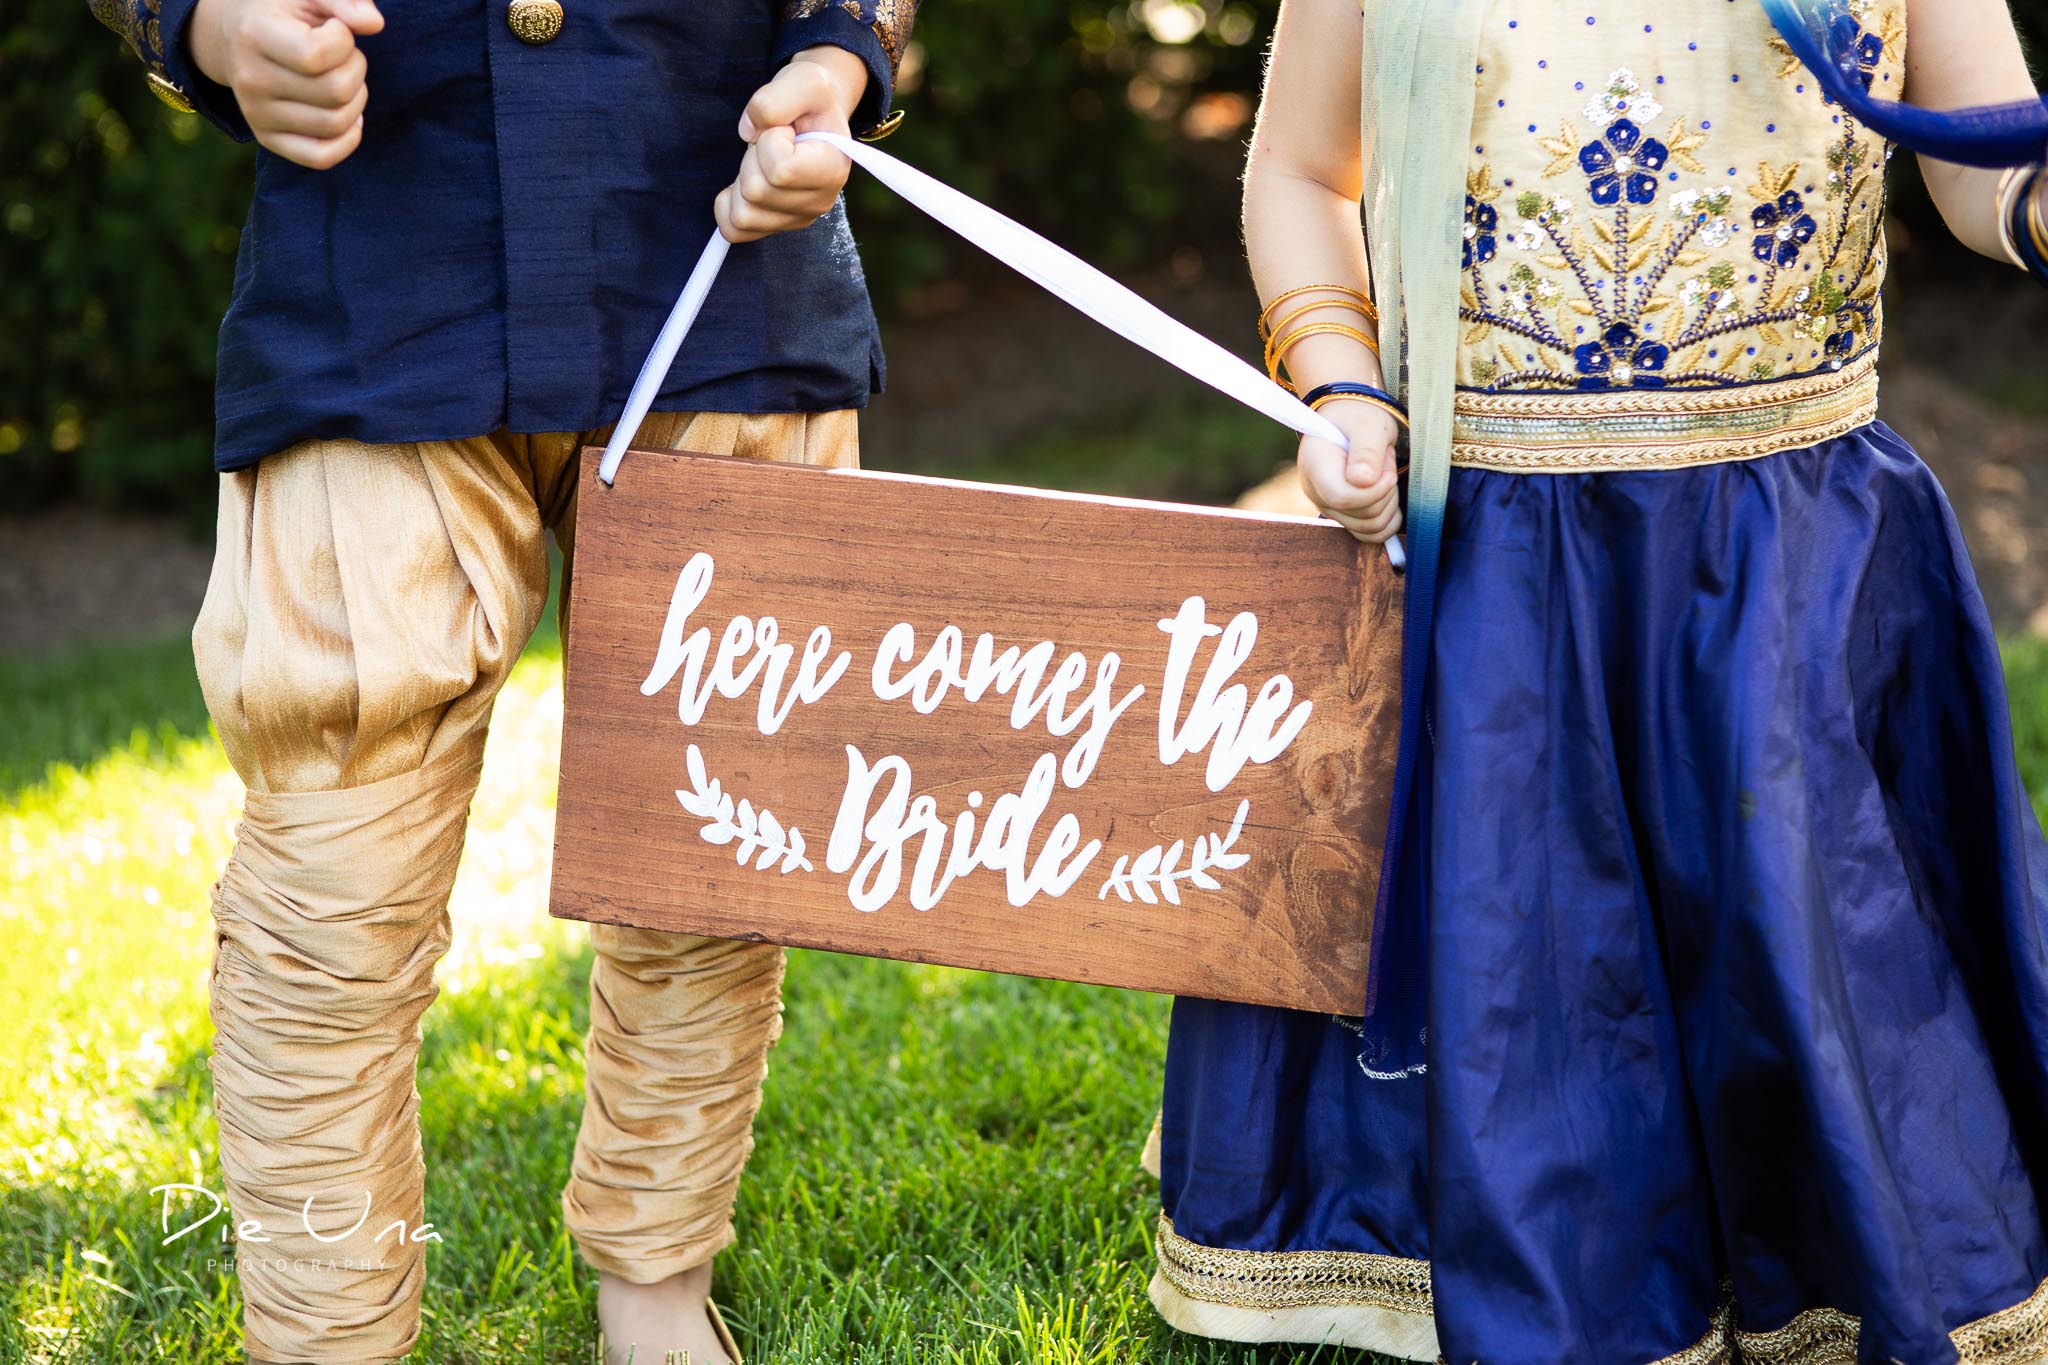 here comes the bride sign being held by flower girl and ringbearer in Hindu wedding.jpg